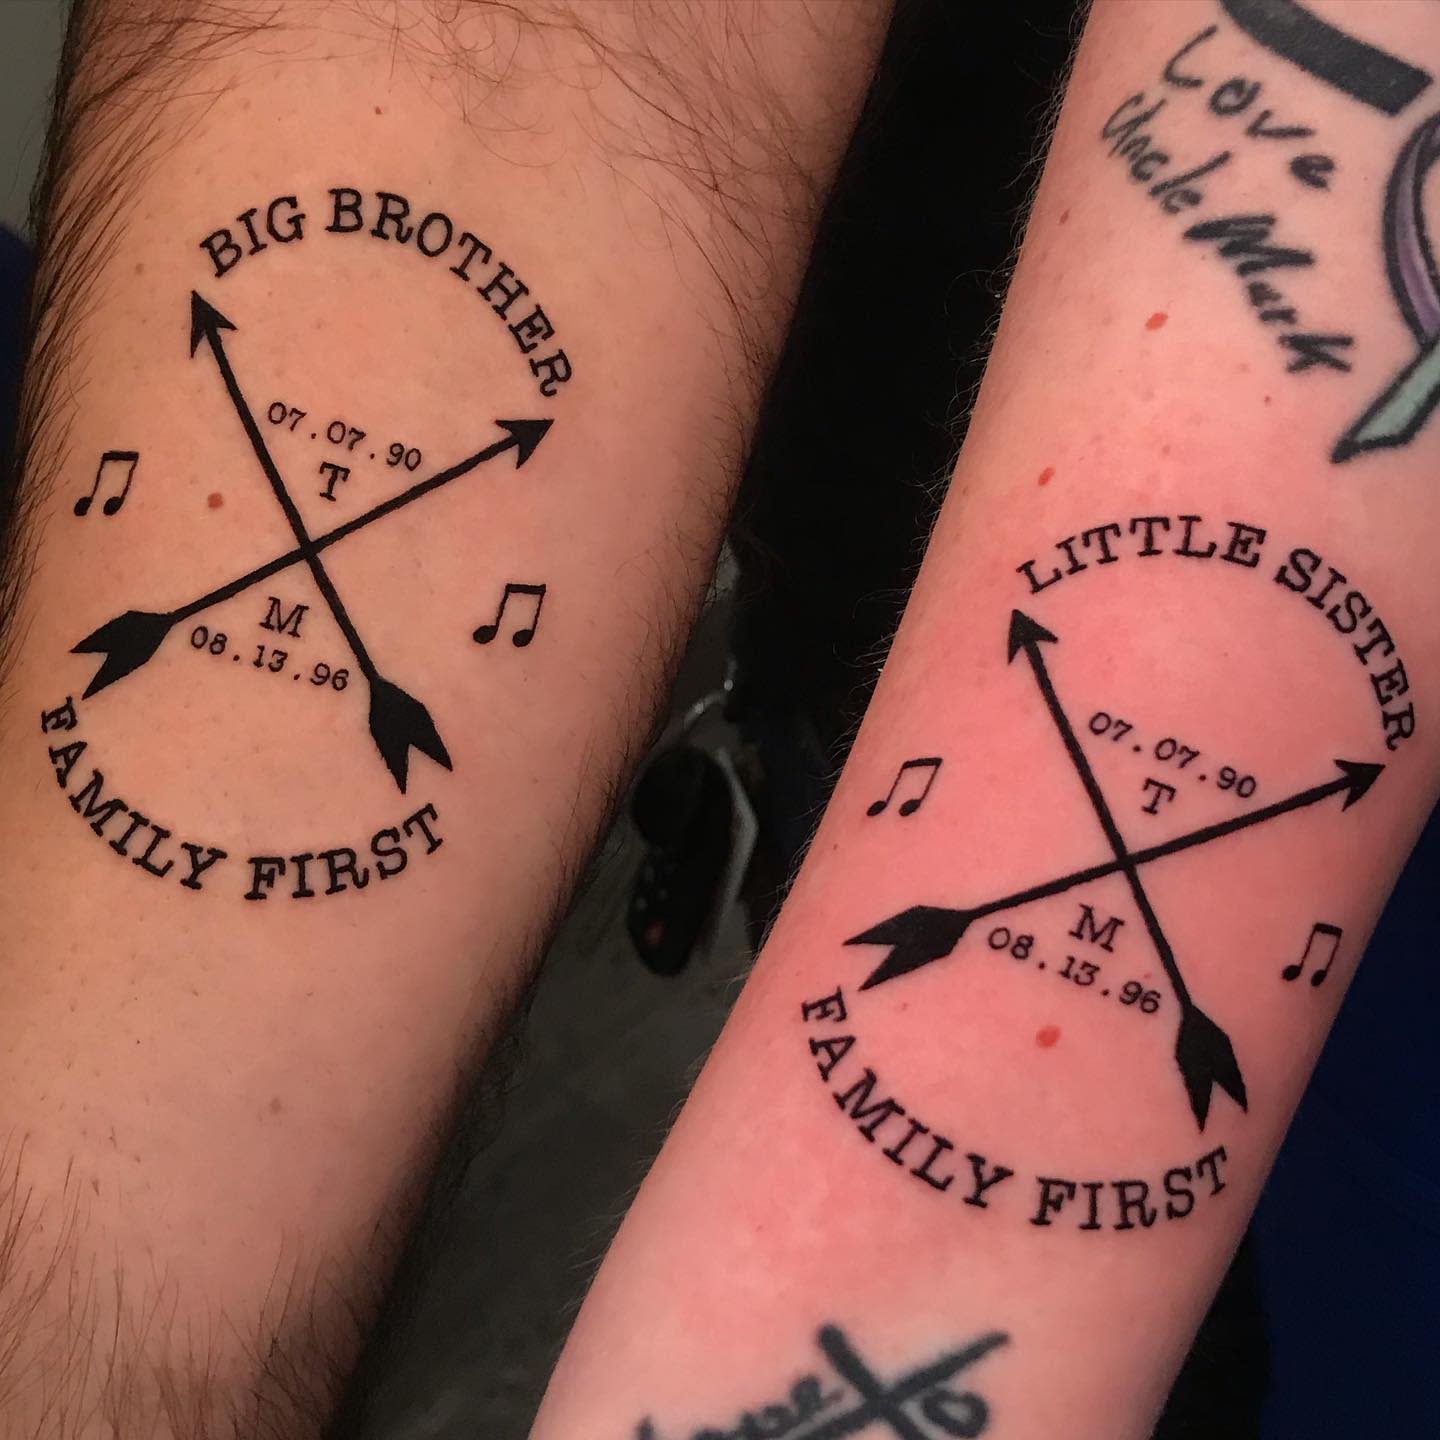 Tattoo Ideas for Men - Matching Tattoos for Sisters | Sister Tattoos Designs,  Ideas and Meaning - TattooViral.com | Your Number One source for daily Tattoo  designs, Ideas & Inspiration